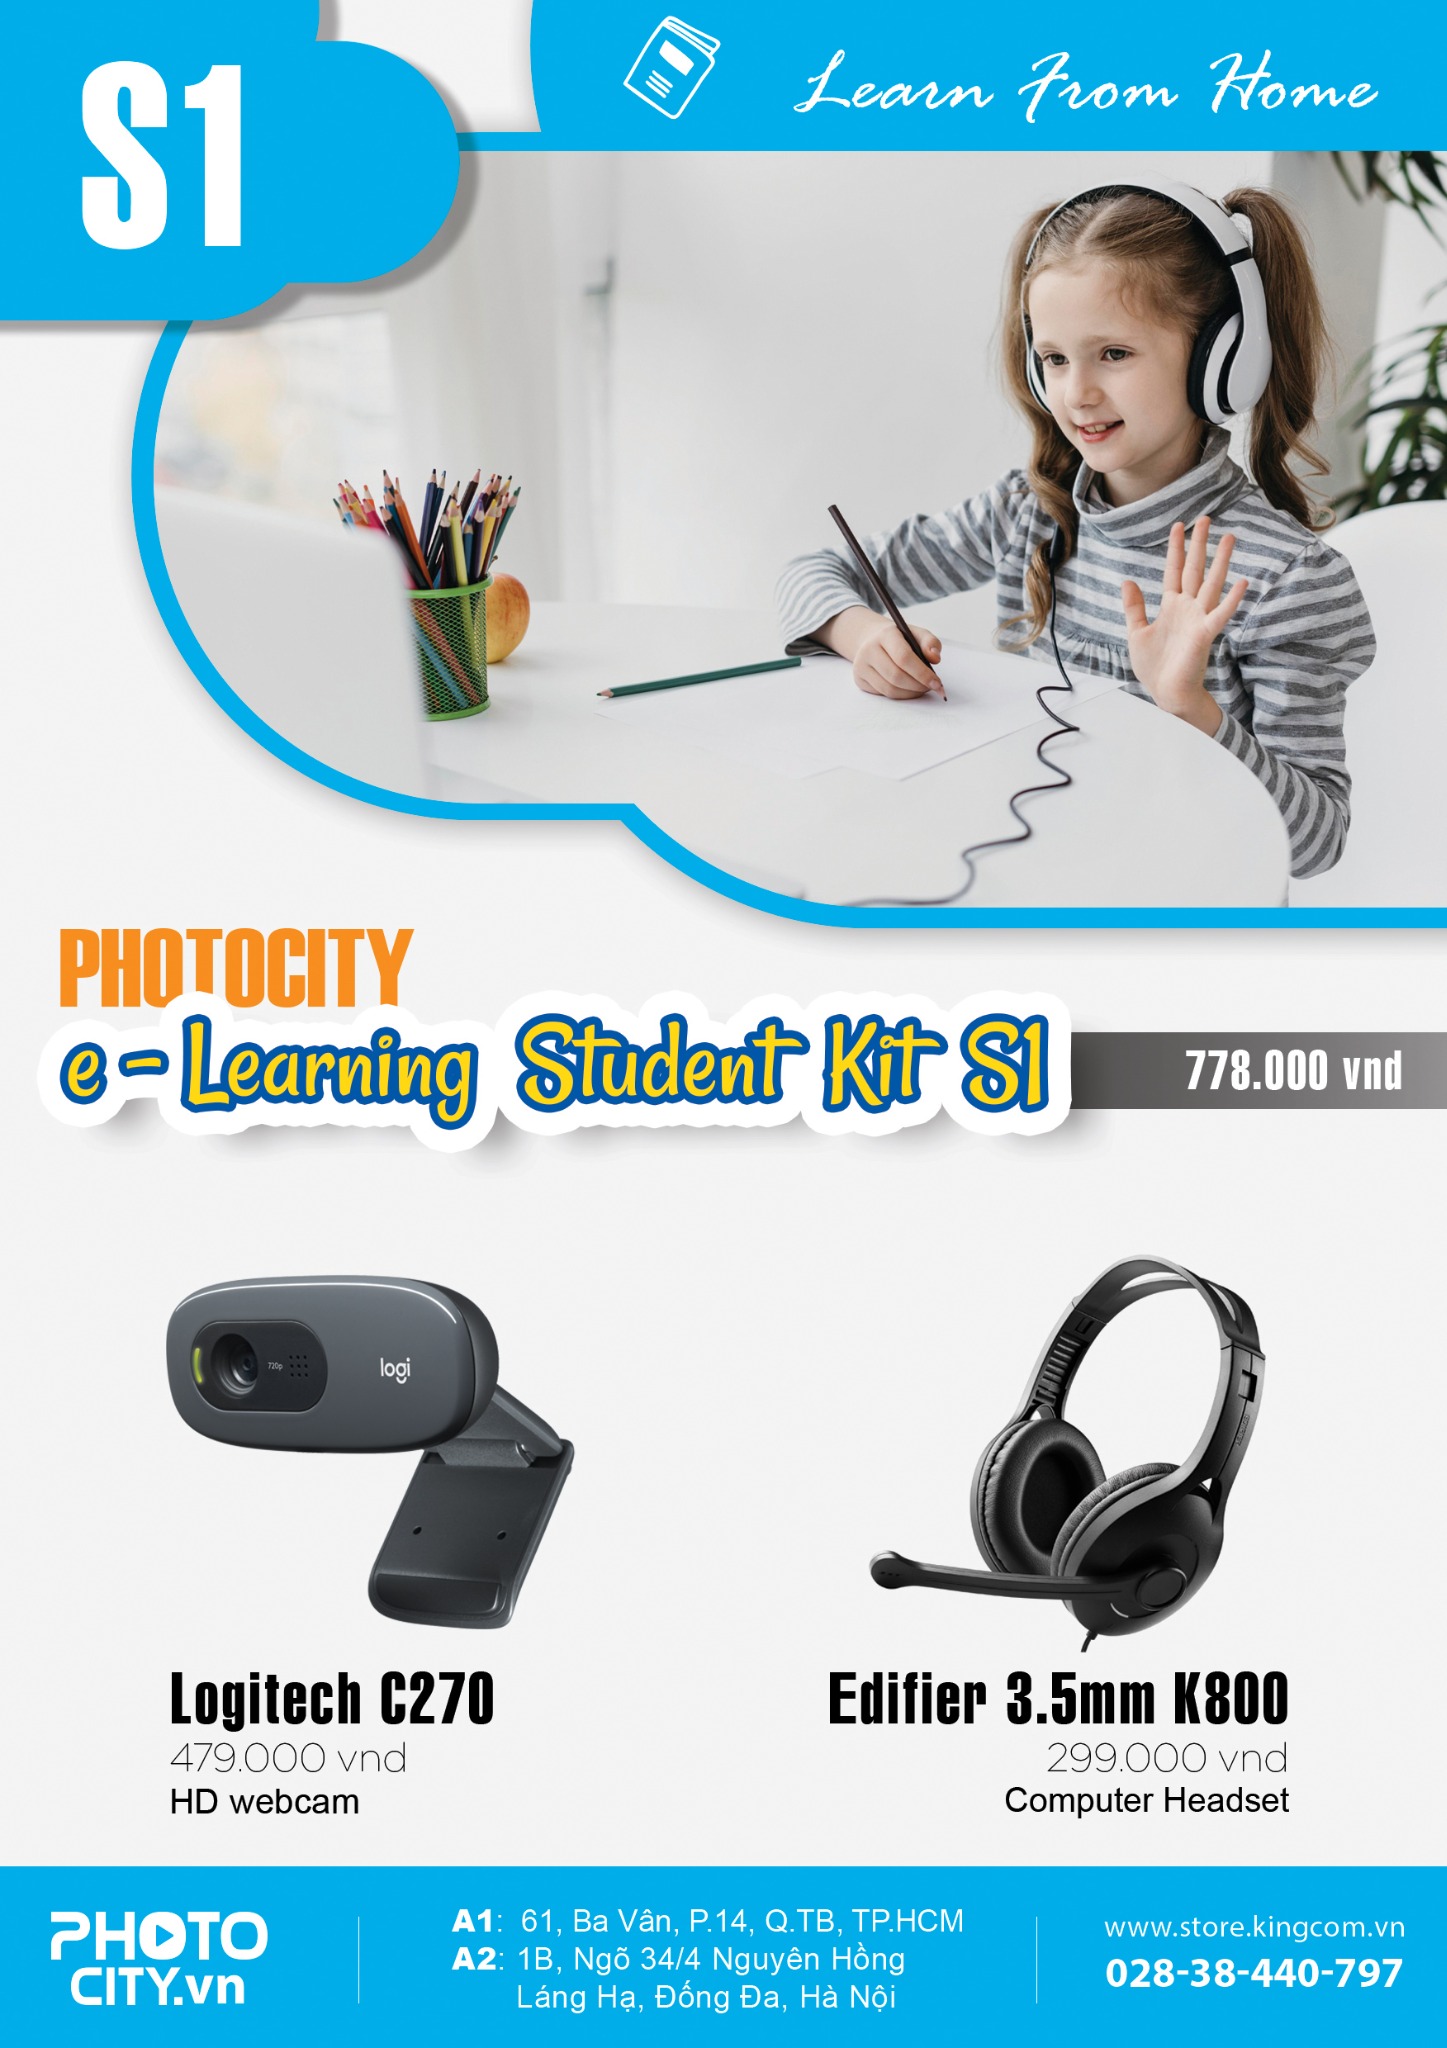 PhotoCity e -learning Student Kit S1 (Bộ dụng cụ học online)